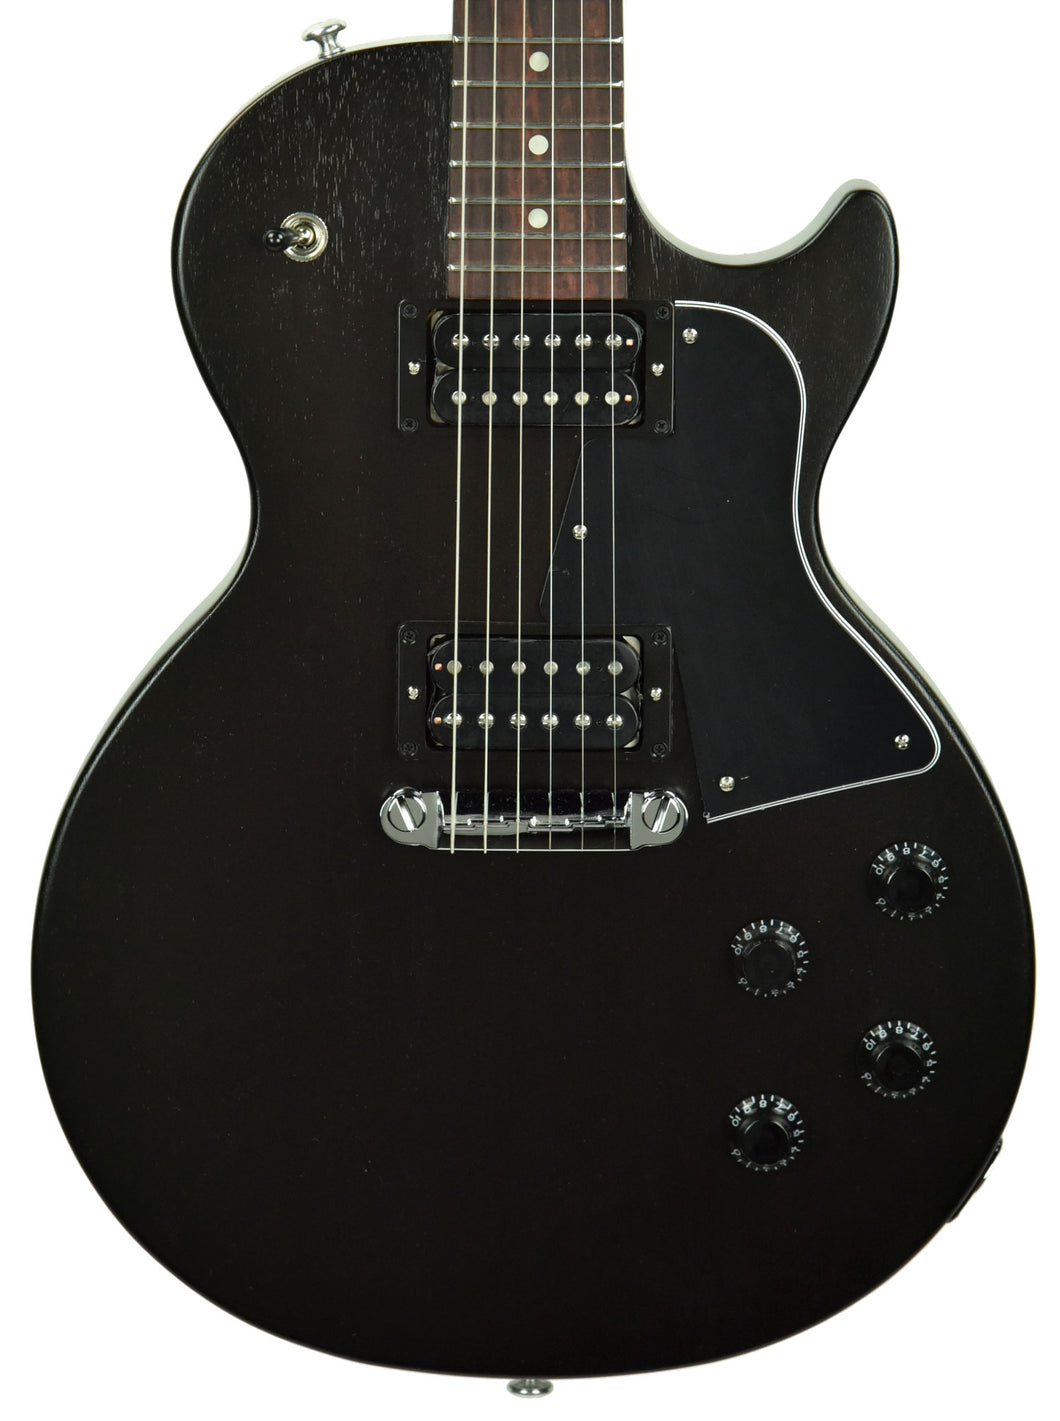 Gibson Les Paul Special Tribute Humbucker in Ebony Stain 202700054 - The Music Gallery